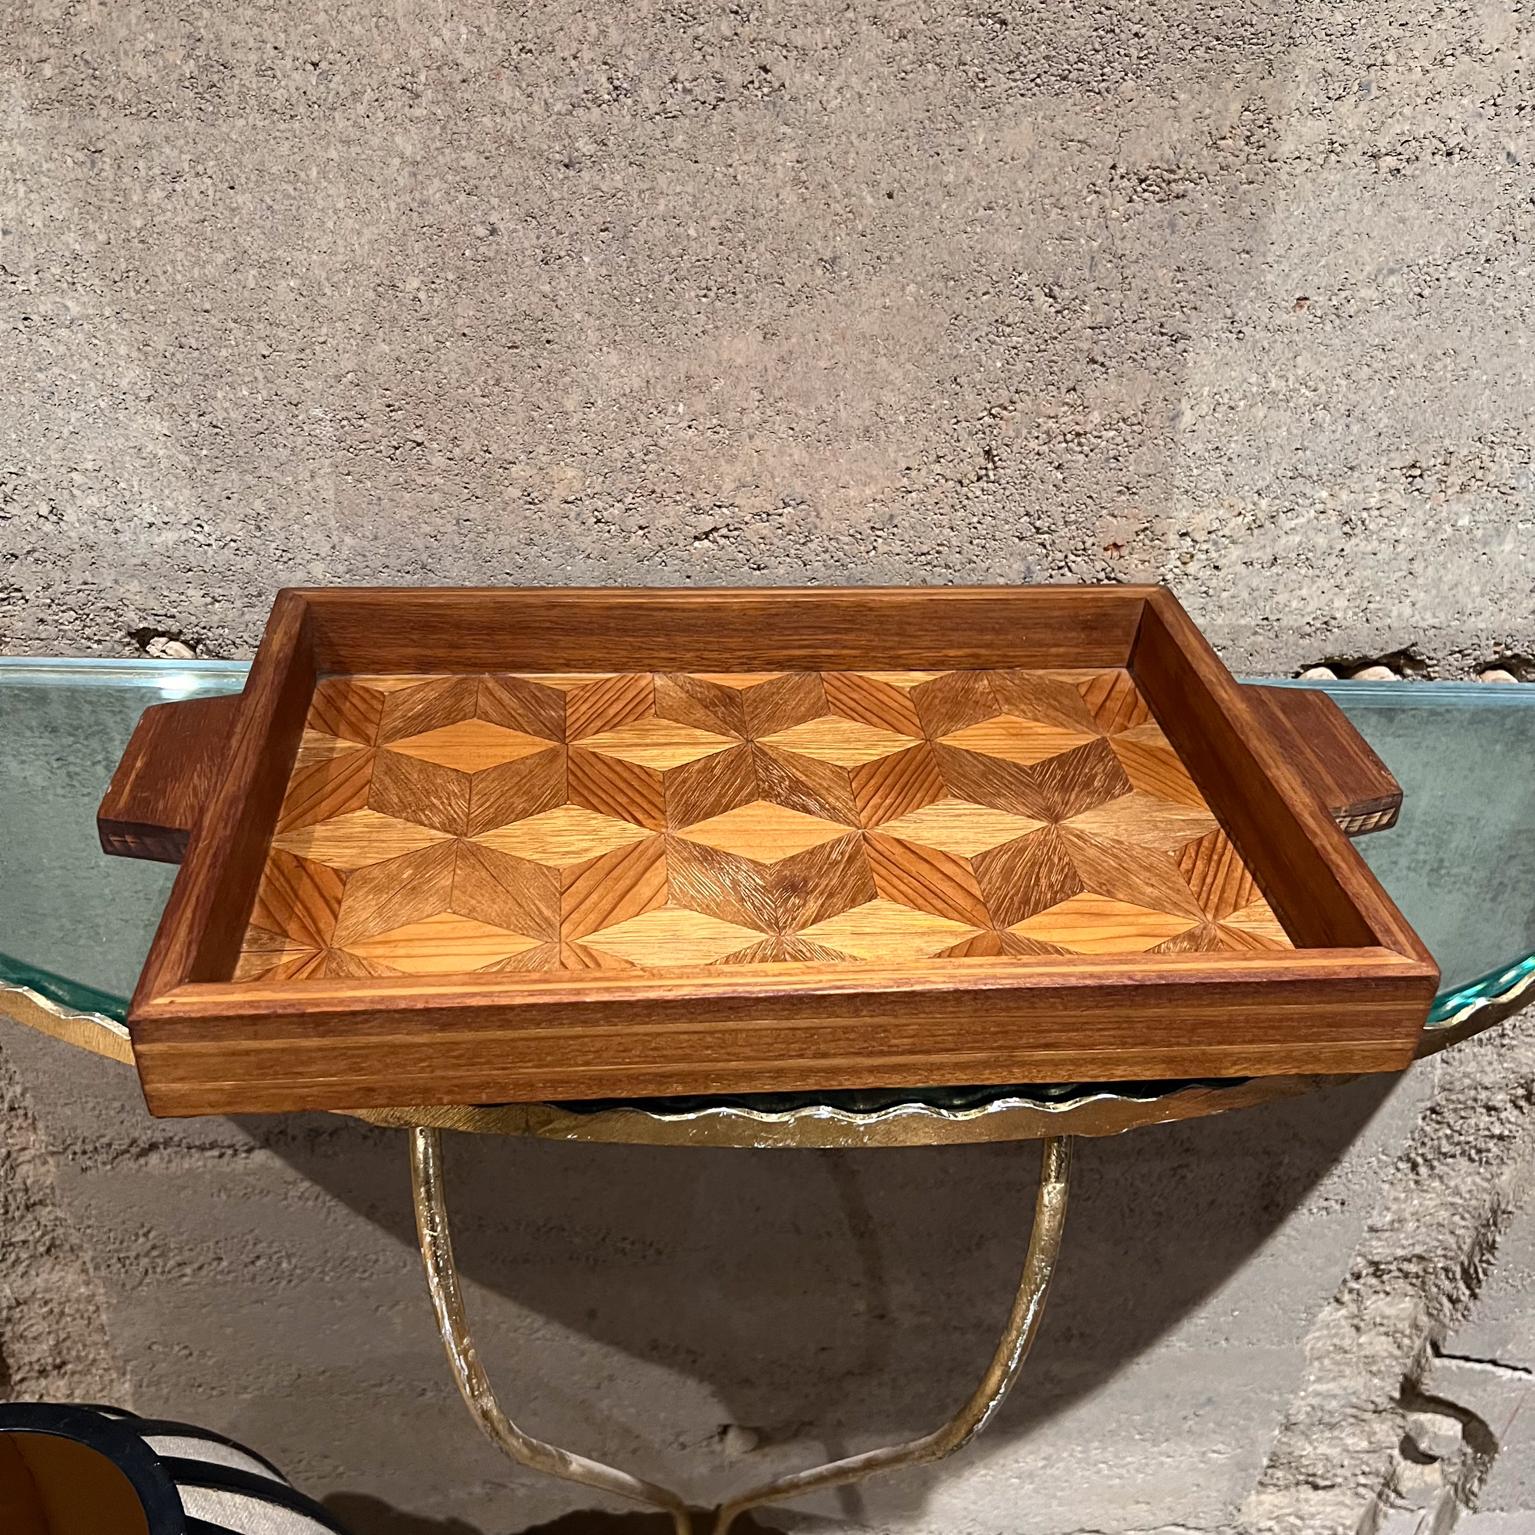 1960s Geometric Wood Serving Tray In Good Condition For Sale In Chula Vista, CA